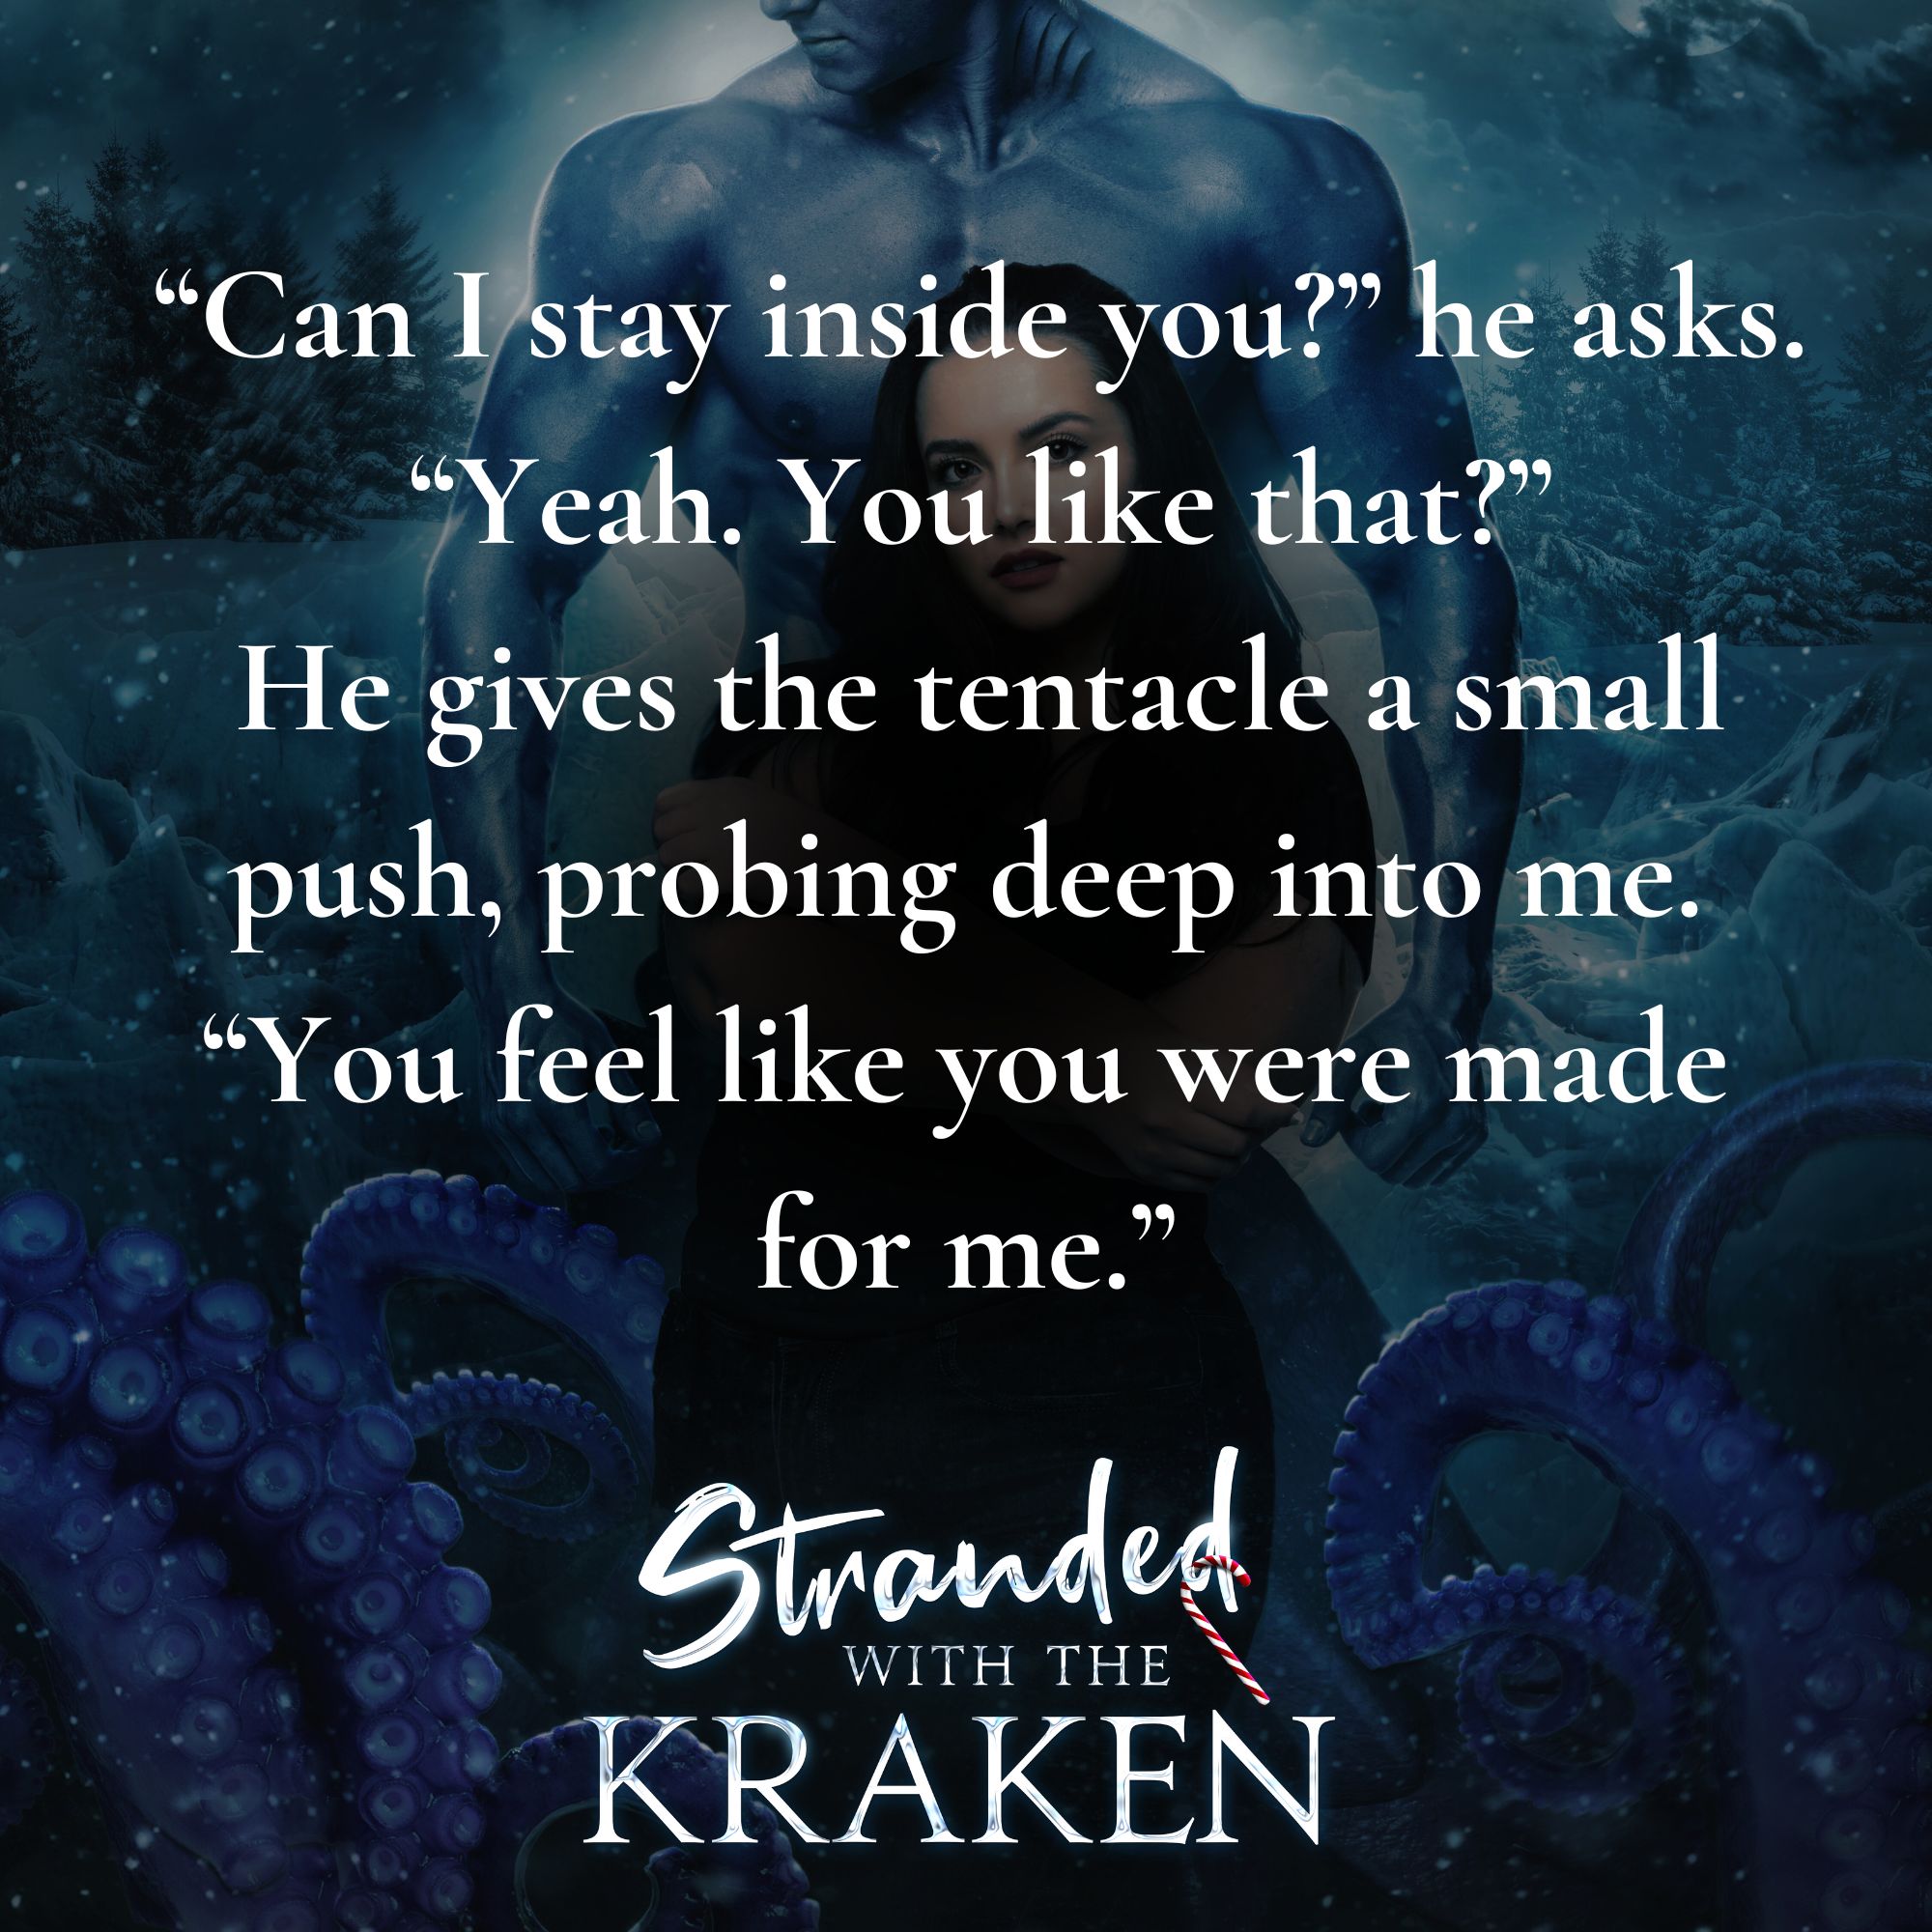 Stranded with the Kraken by Zoe Ashwood